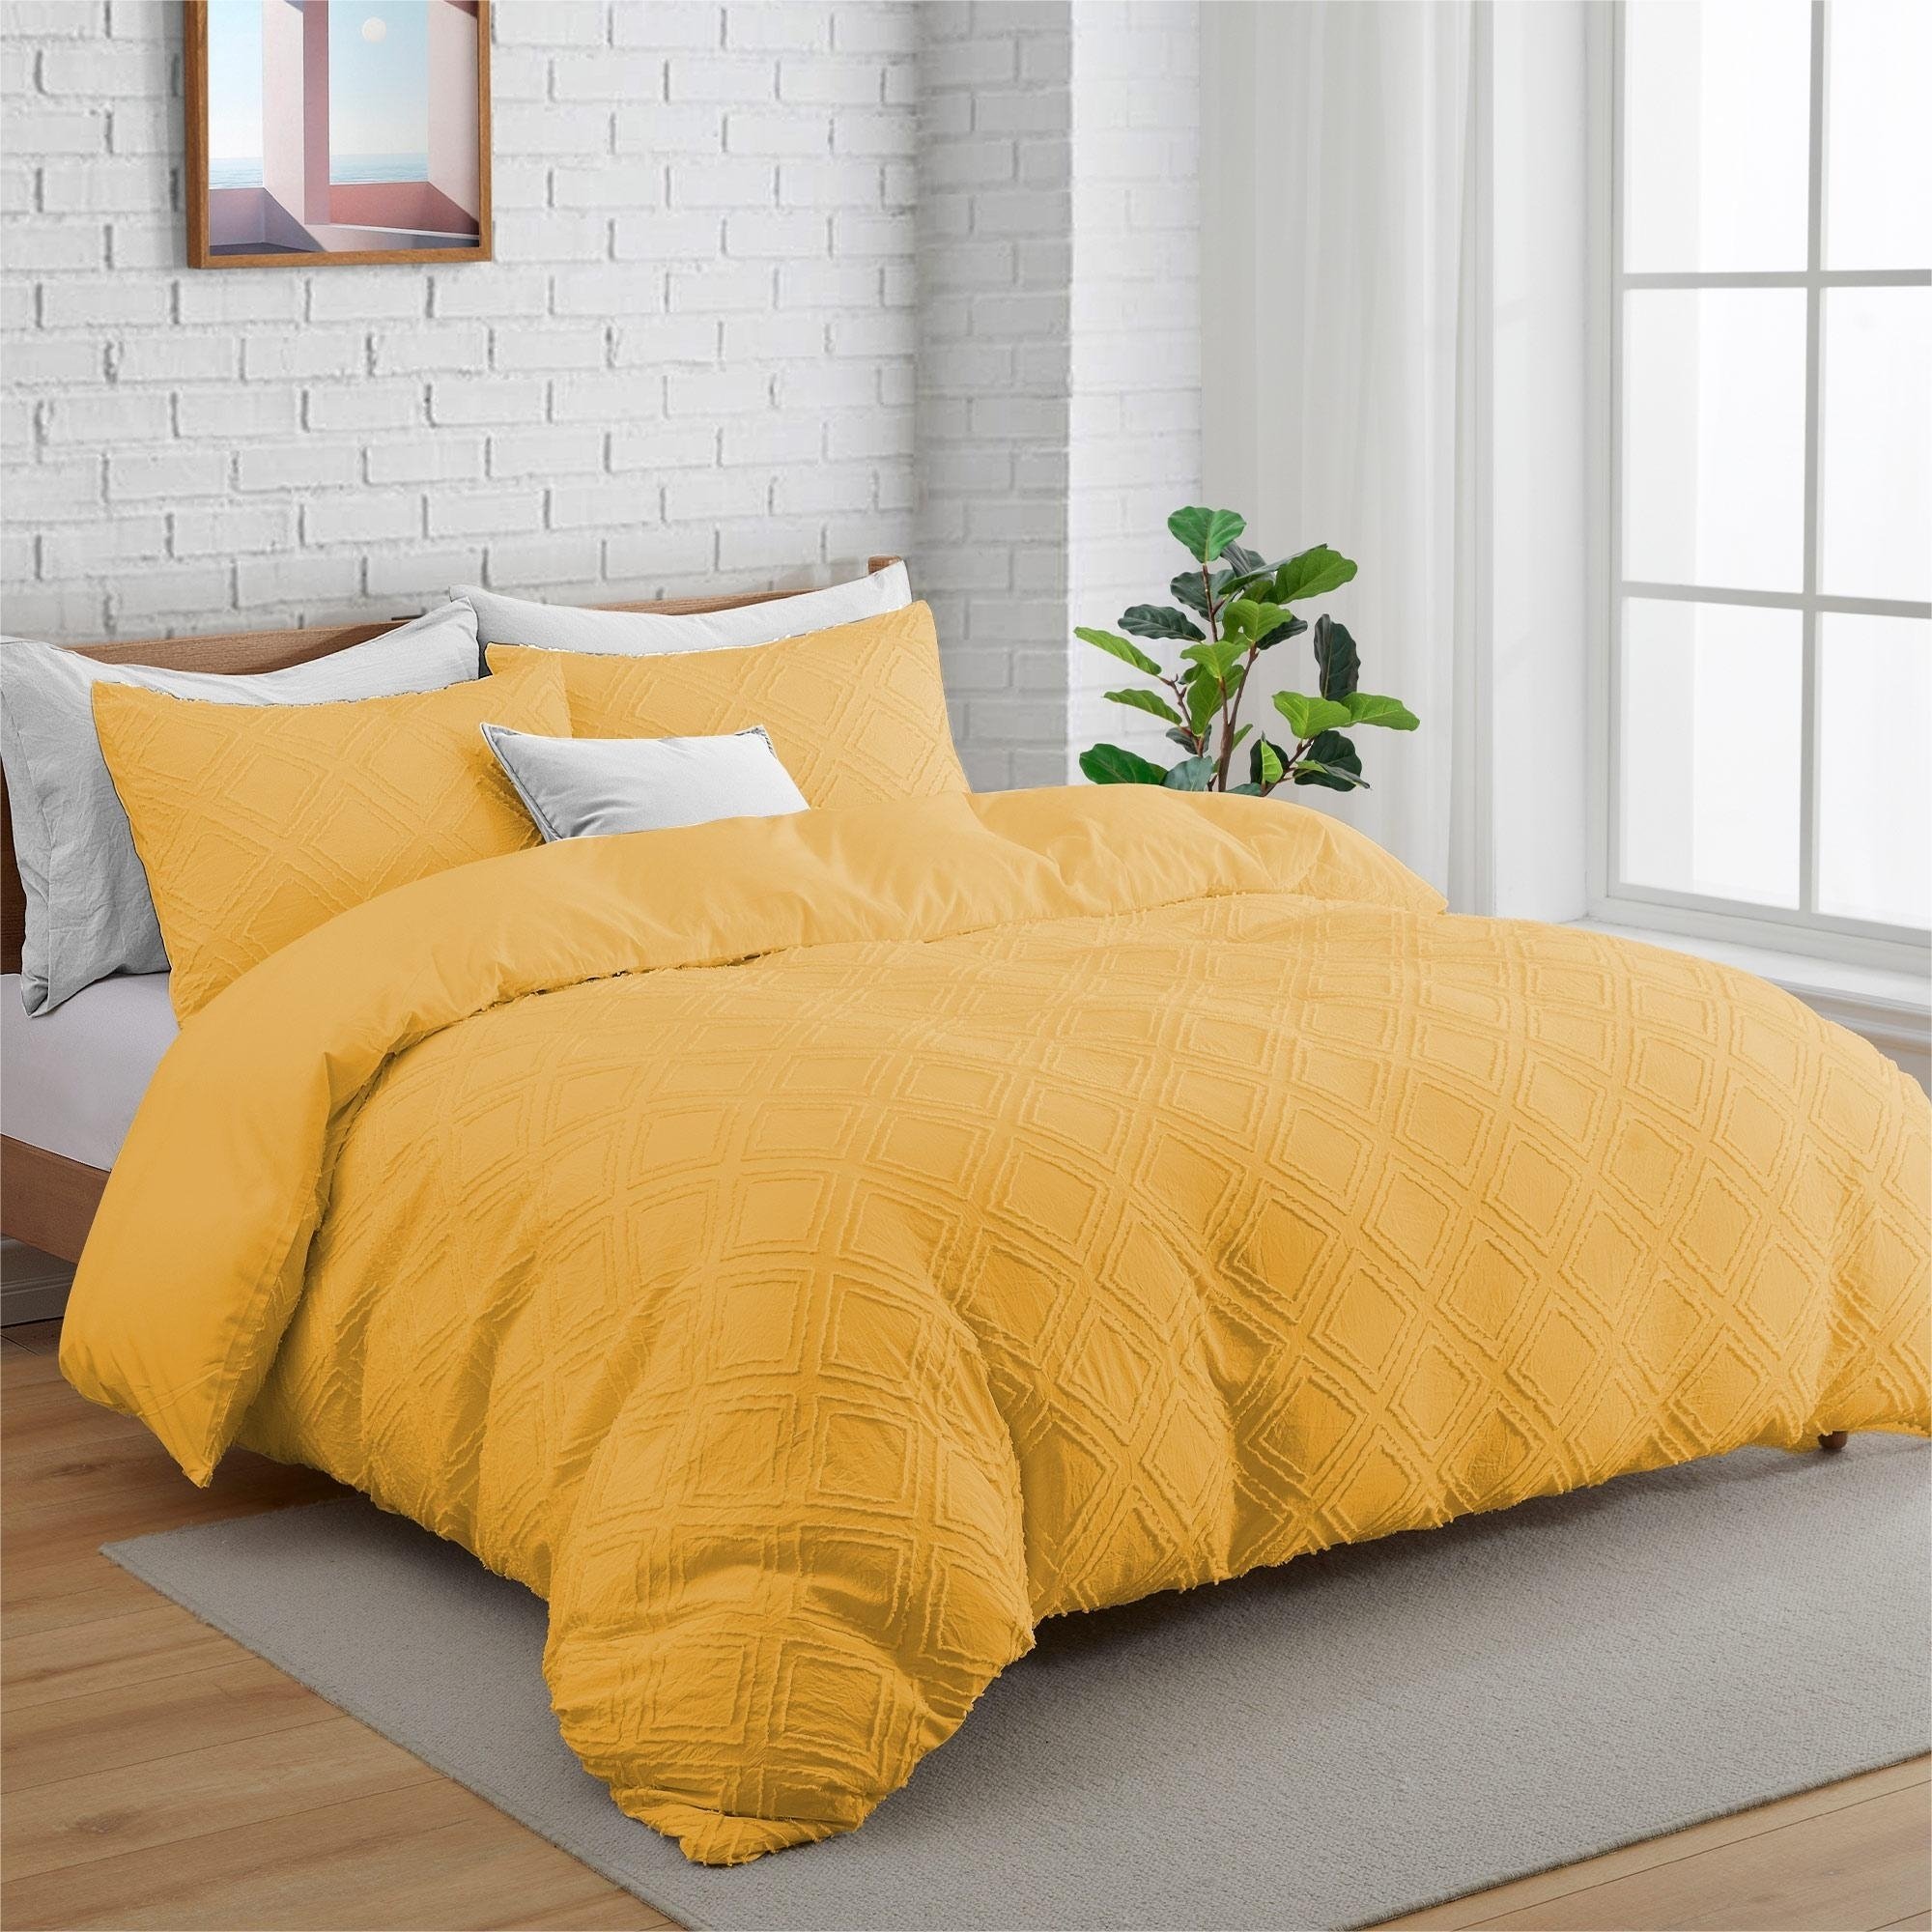 Clipped Jacquard Duvet Cover Set With Shams - Yellow/Square, King